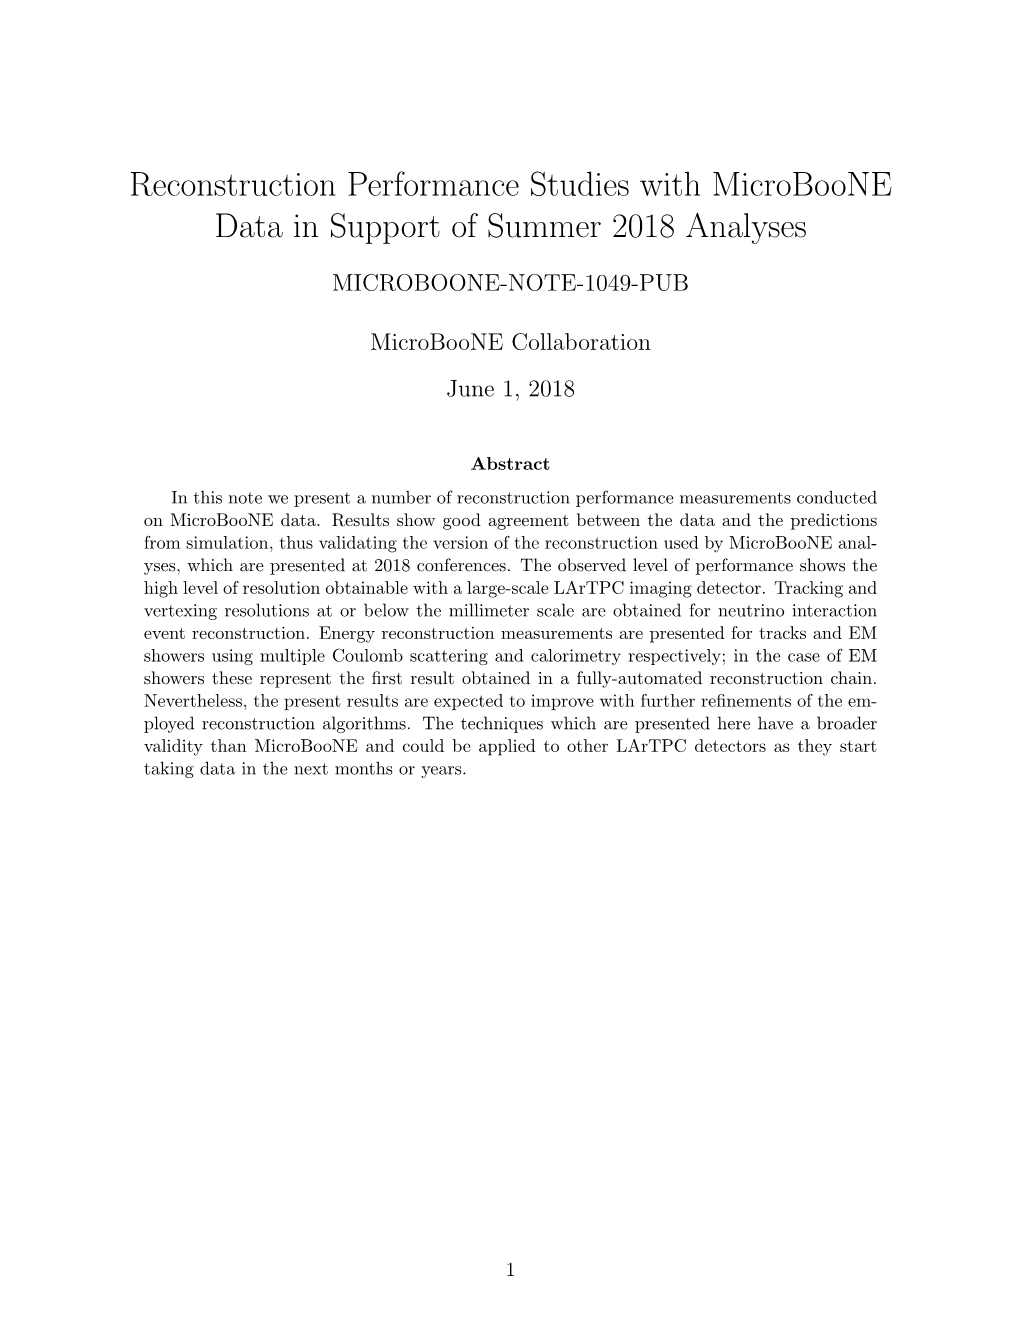 Reconstruction Performance Studies with Microboone Data in Support of Summer 2018 Analyses